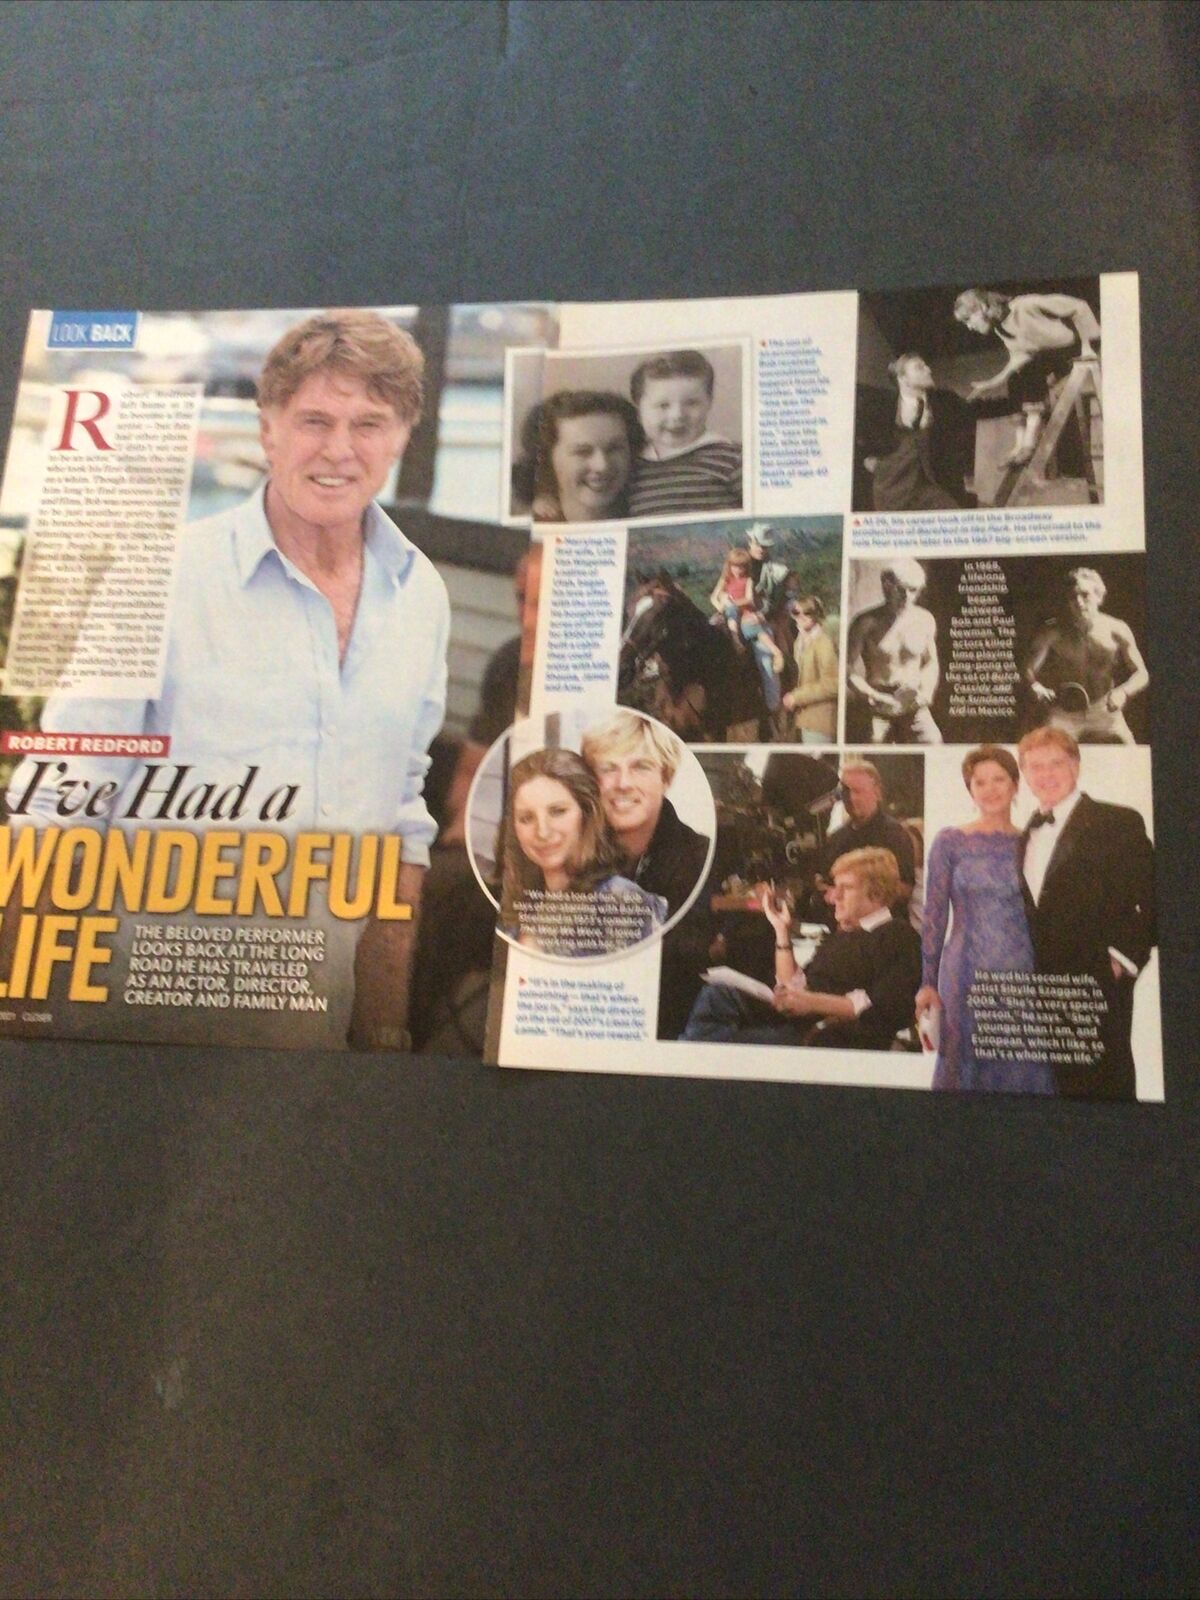 Robert Redford Clippings Article I’ve Had A Wonderful Life